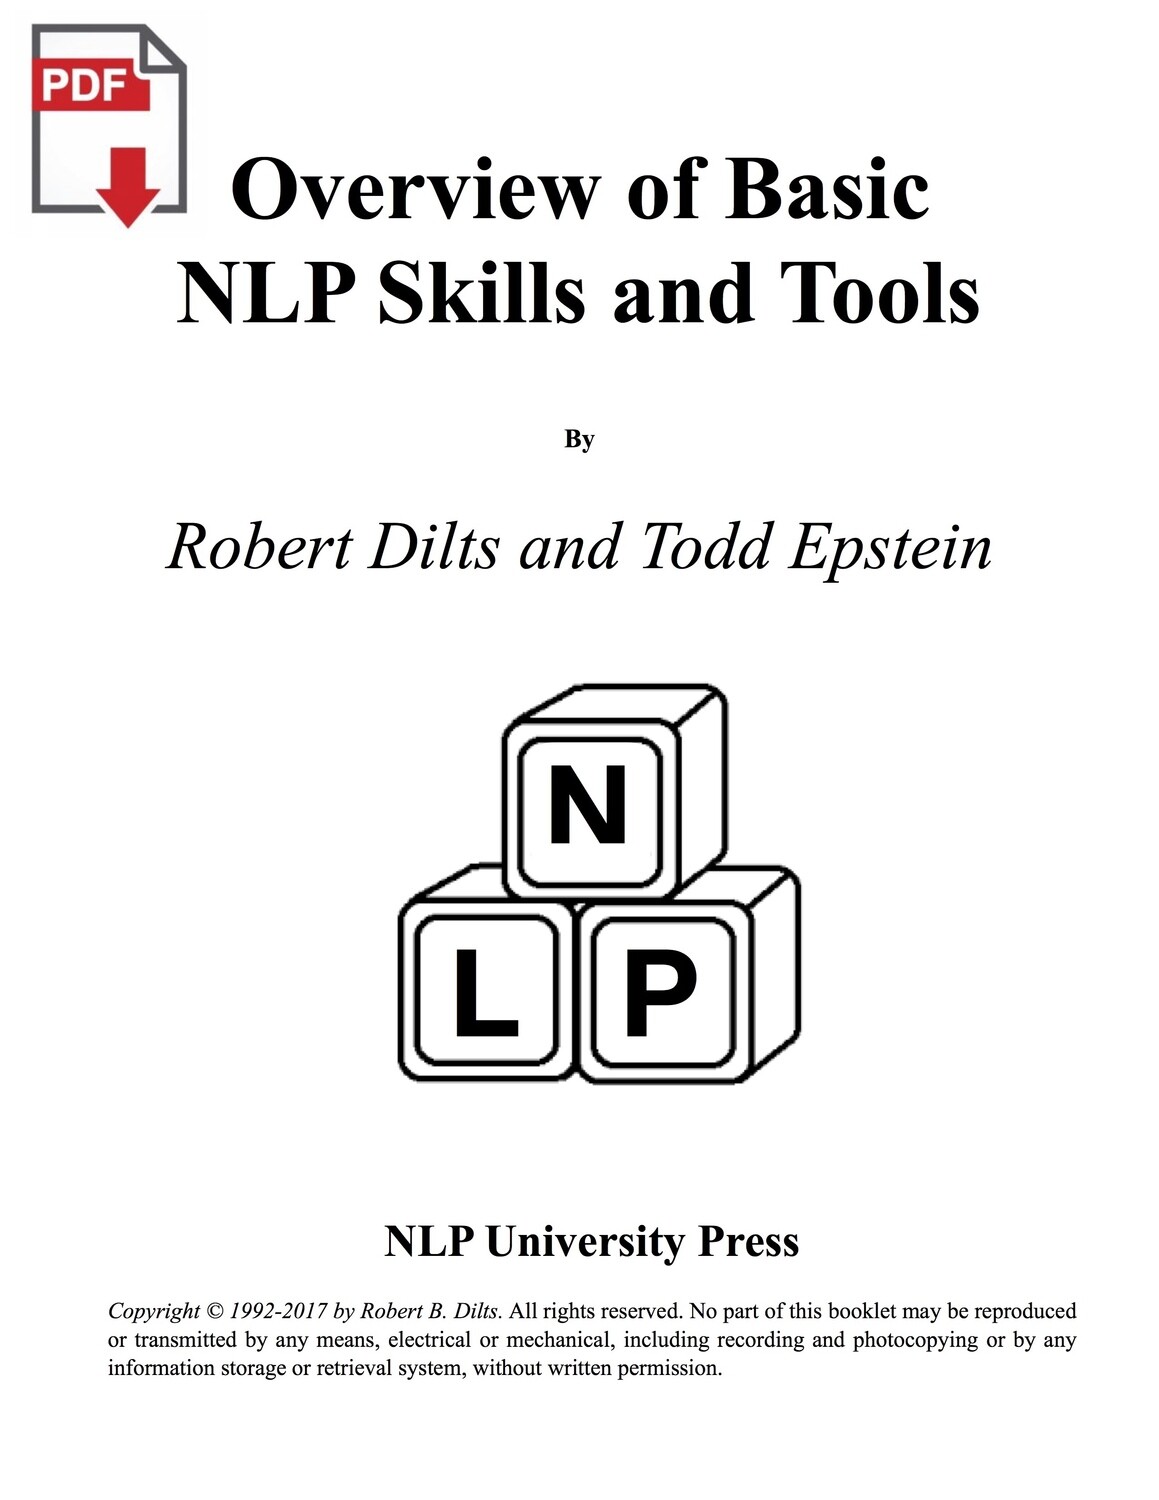 Overview of Basic NLP Skills and Tools [PDF]